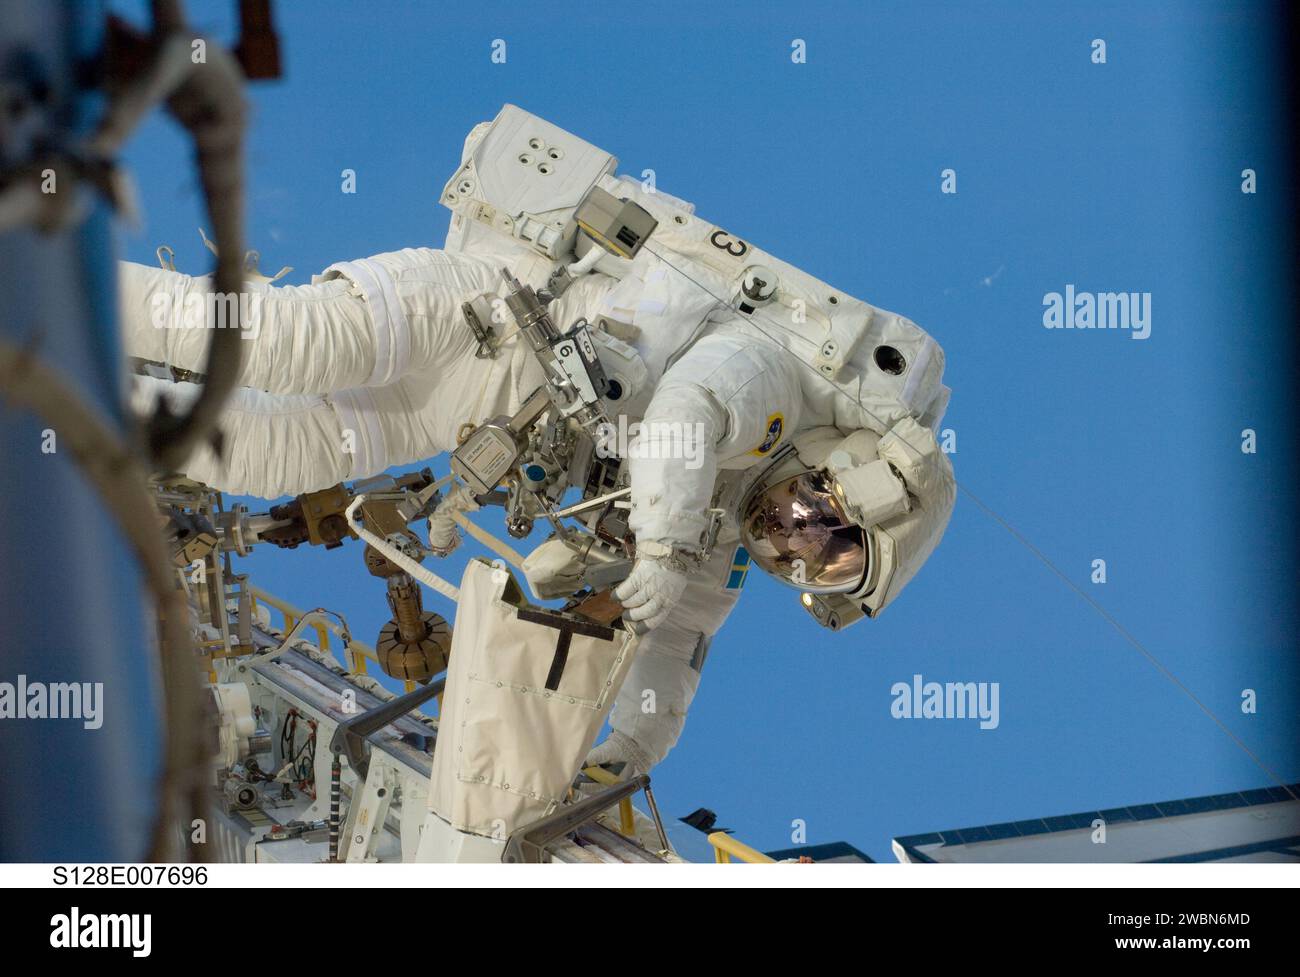 S128-E-007696 (3 Sept. 2009) --- European Space Agency astronaut Christer Fuglesang, STS-128 mission specialist, participates in the mission's second session of extravehicular activity (EVA) as construction and maintenance continue on the International Space Station. During the six-hour, 39-minute spacewalk, Fuglesang and NASA astronaut John “Danny” Olivas (out of frame), mission specialist, installed the new Ammonia Tank Assembly on the Port 1 Truss and stowed the empty tank assembly into the Space Shuttle Discovery’s cargo bay. Stock Photo